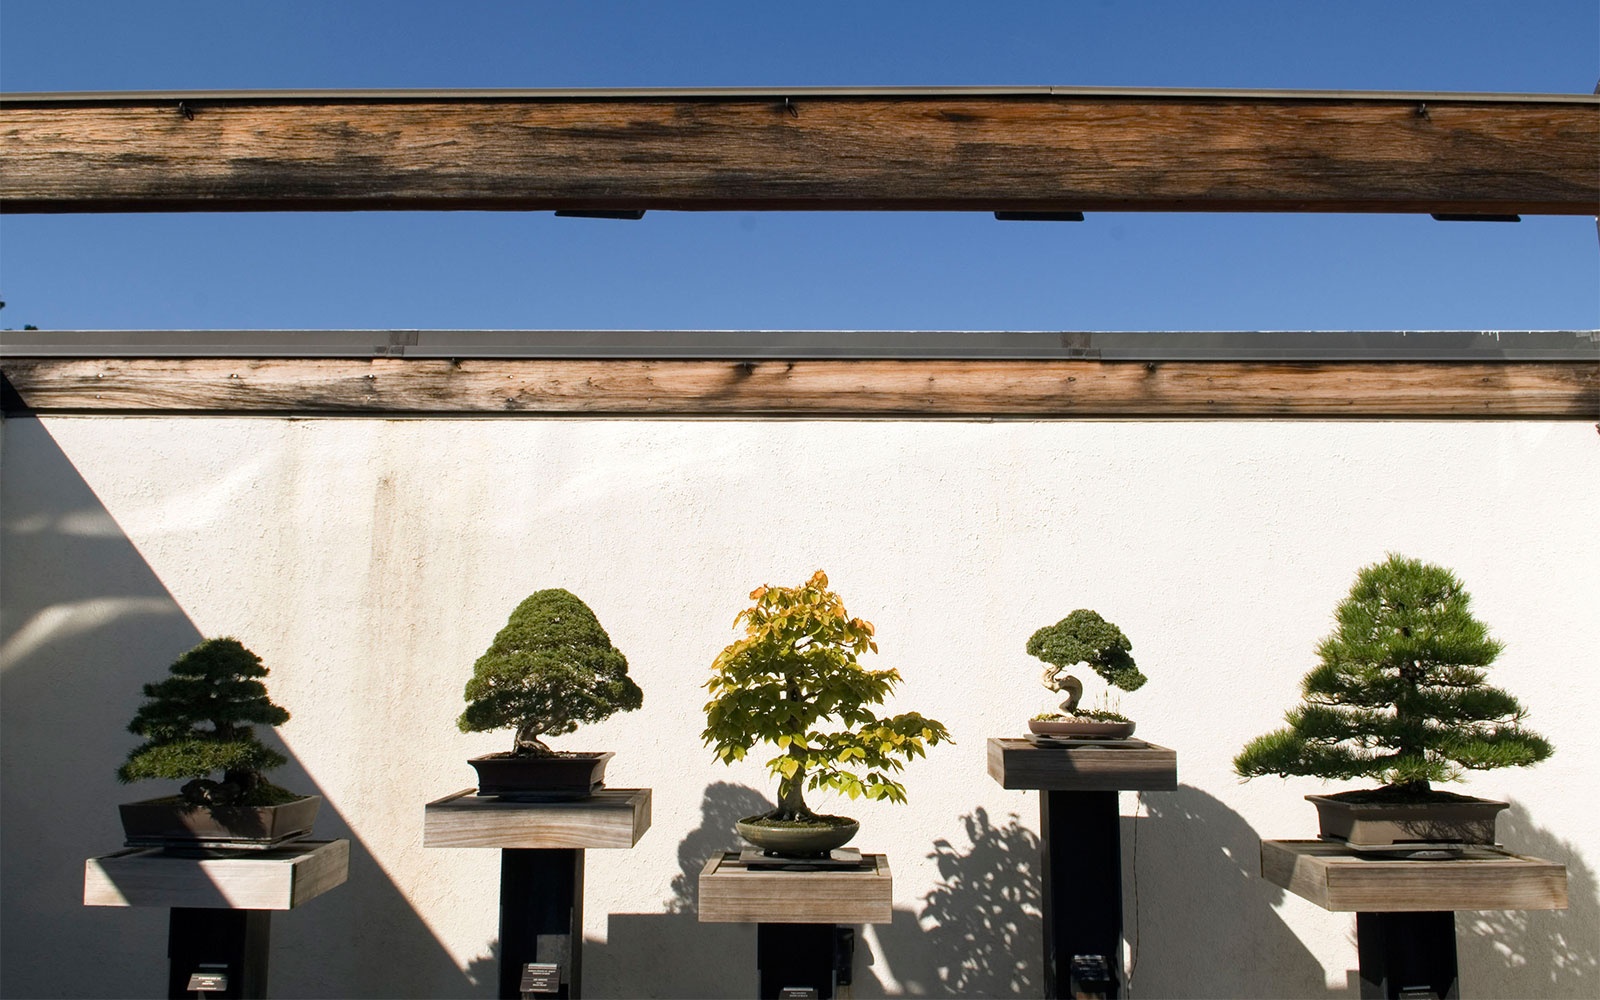 Visit the 390-Year-Old Bonsai That Survived An Atomic Bomb